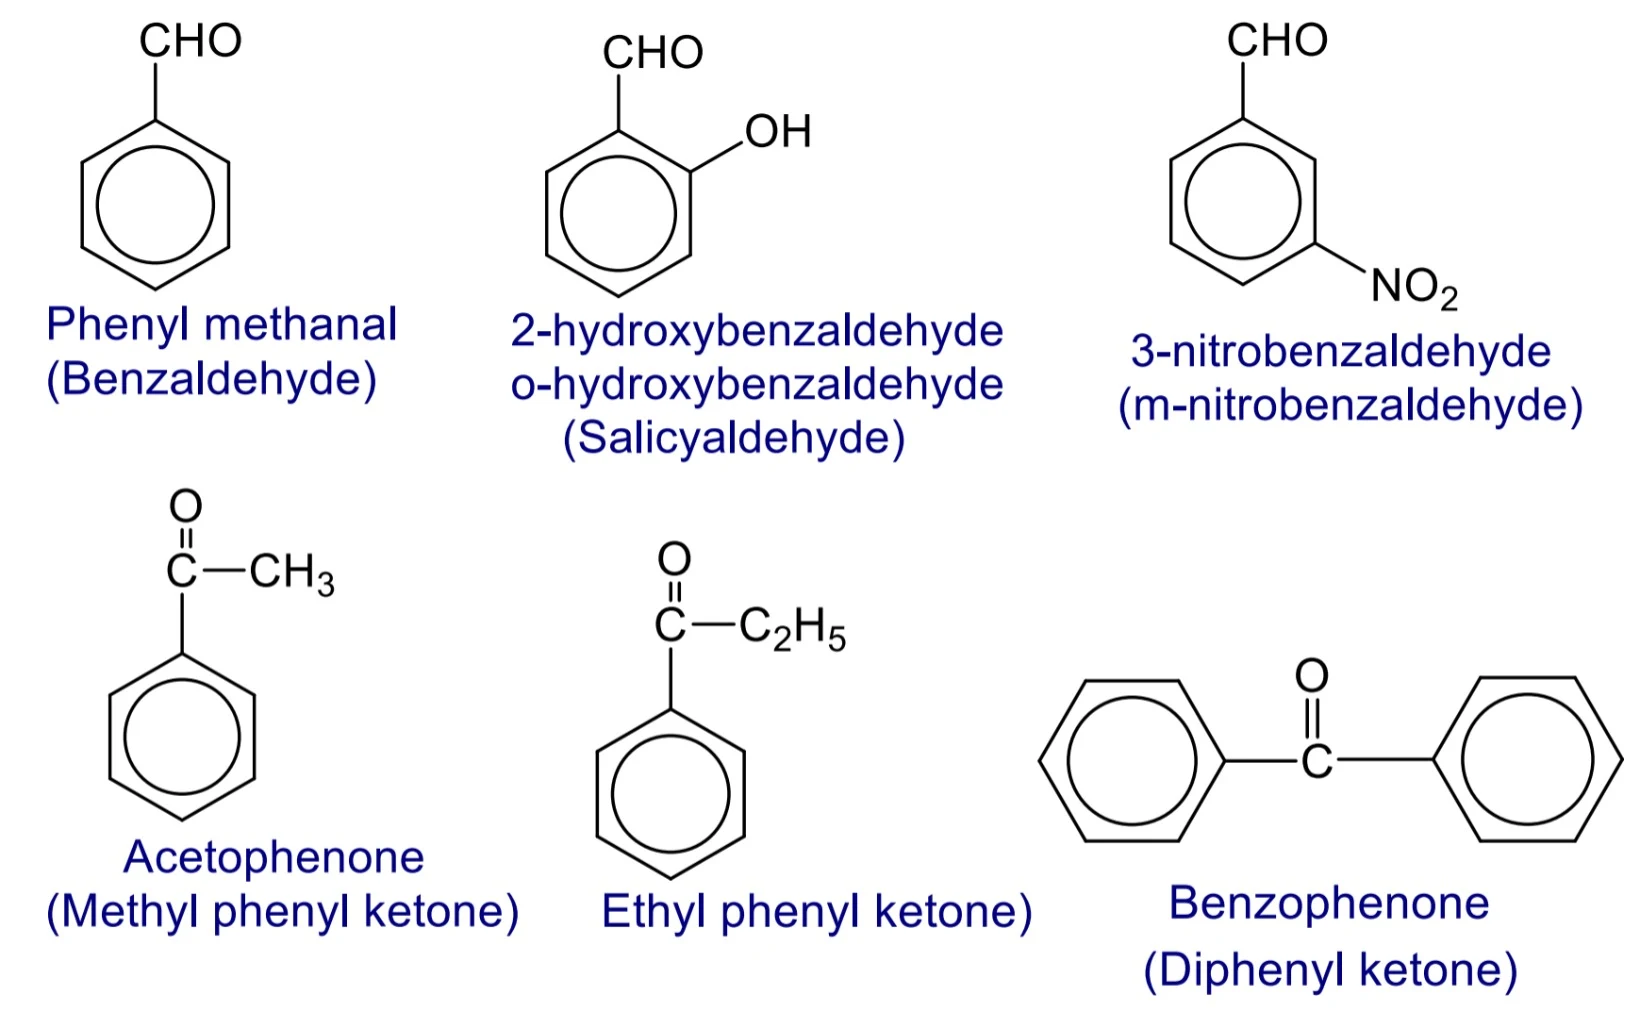 Nomenclature of aromatic aldehydes and ketones